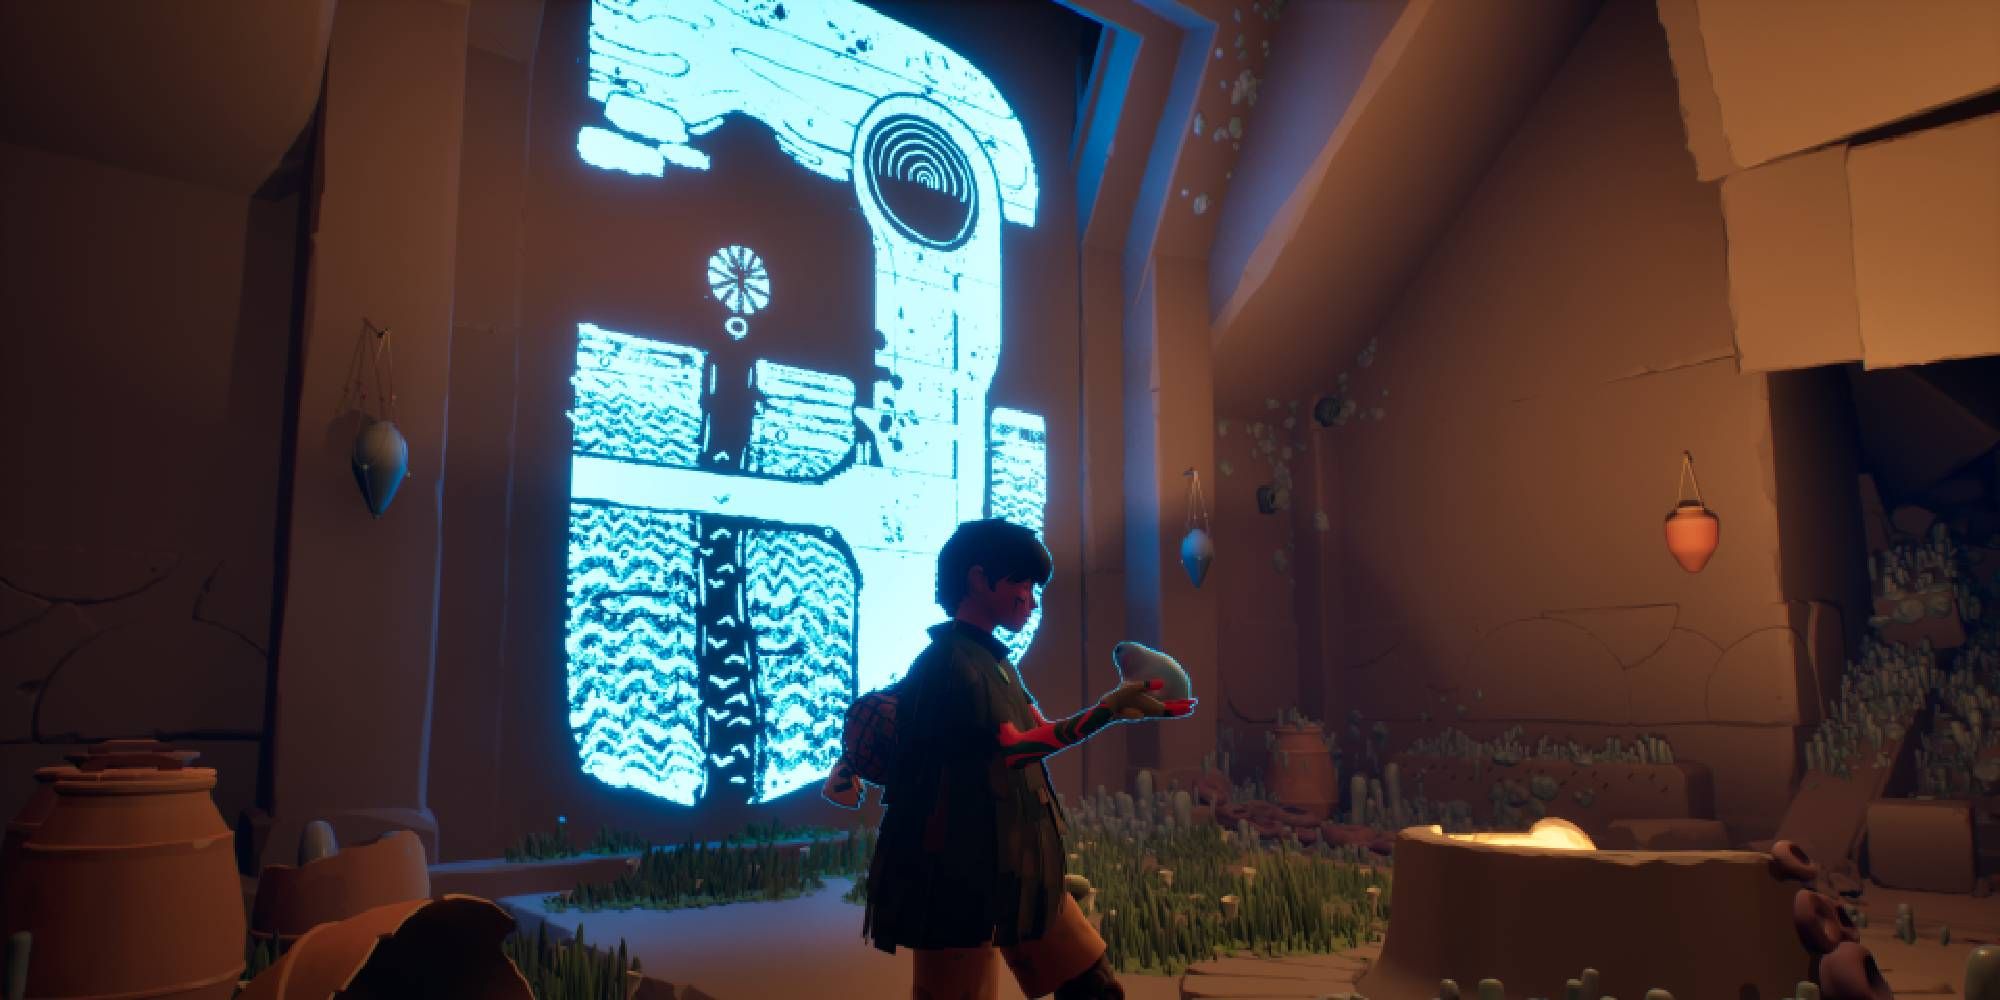 jusant main character standing by glowing piece of art found using focus